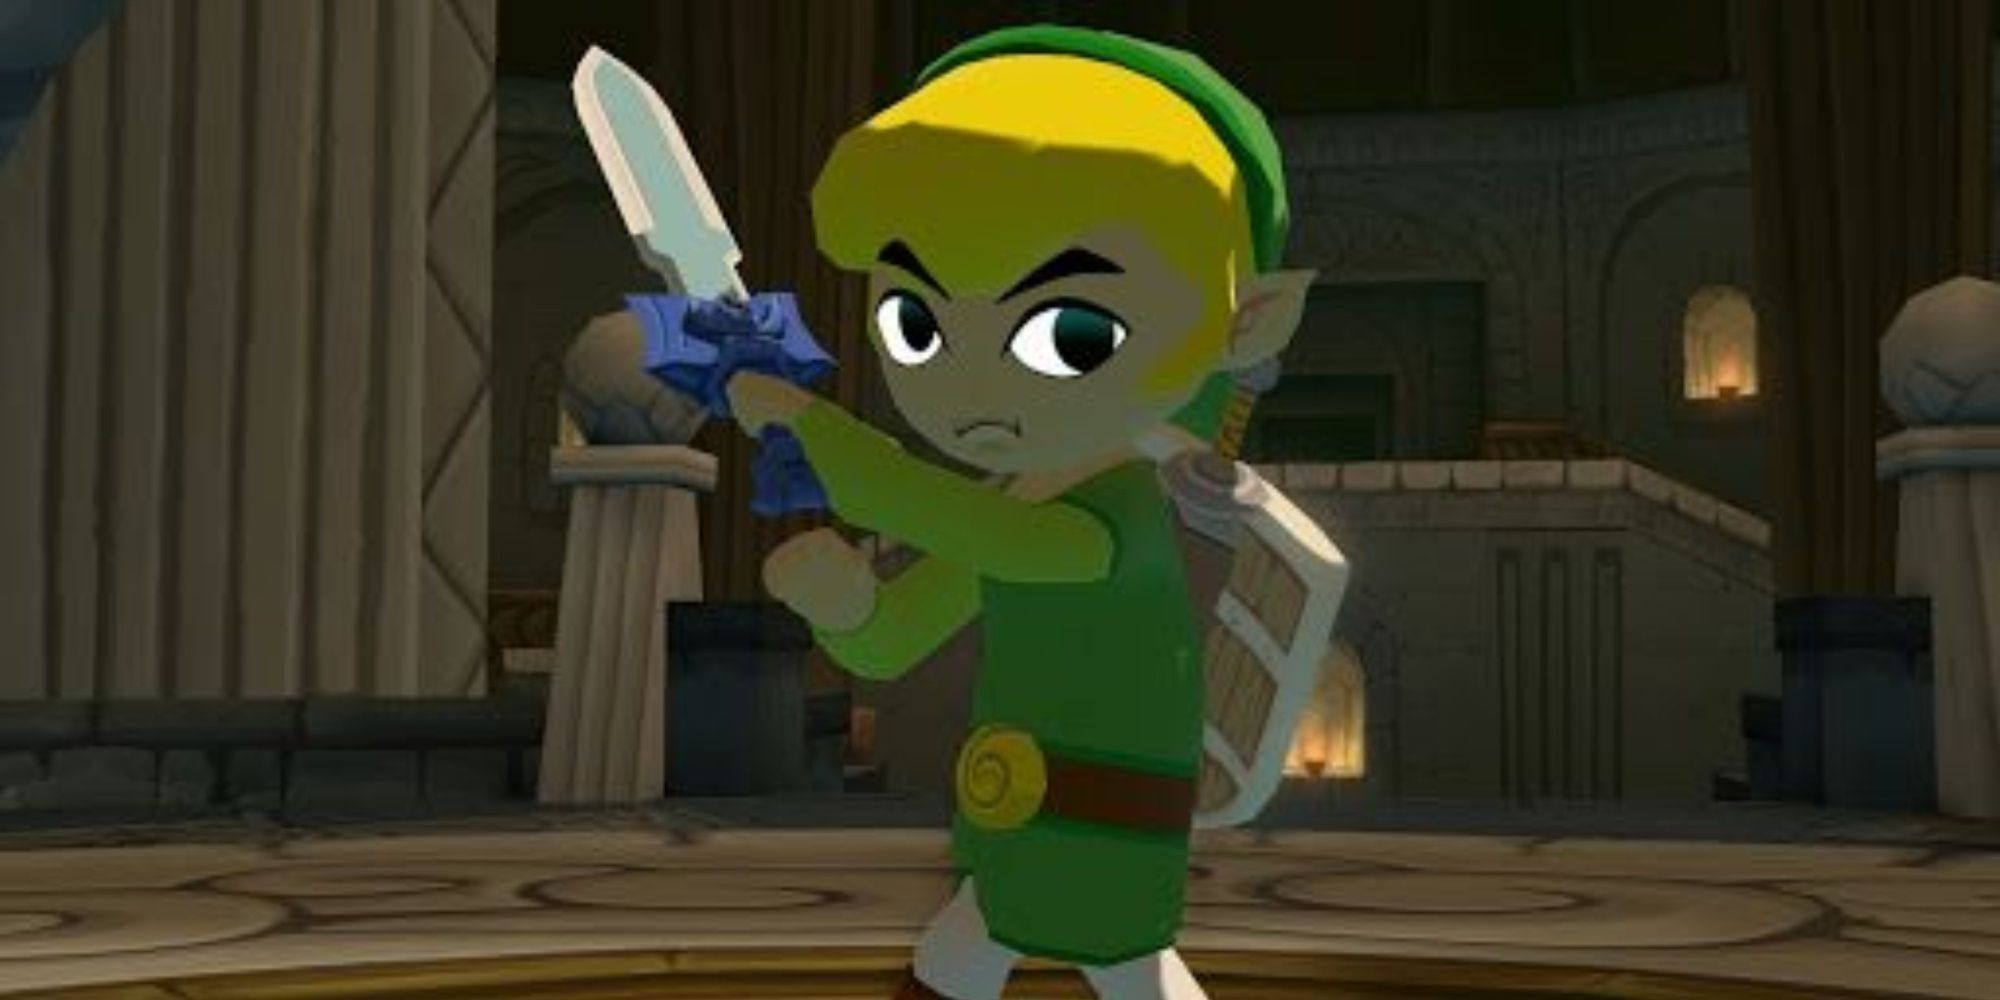 Link holding the Master Sword in the Wind Waker